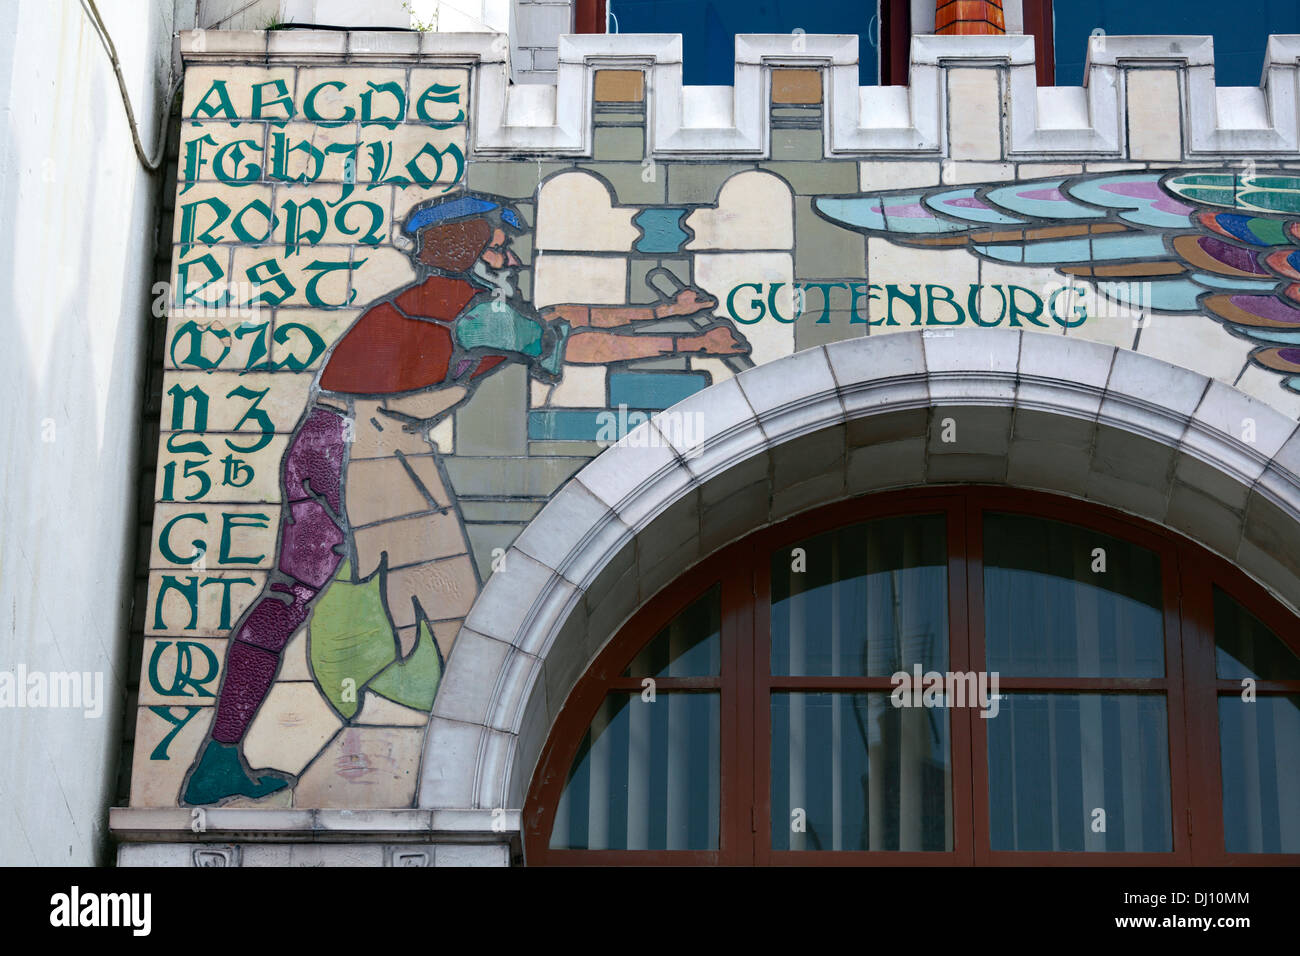 A mural depicting Johann Gutenberg at a printing press, on the facade of the former Edward Everard's print works, Bristol. Stock Photo